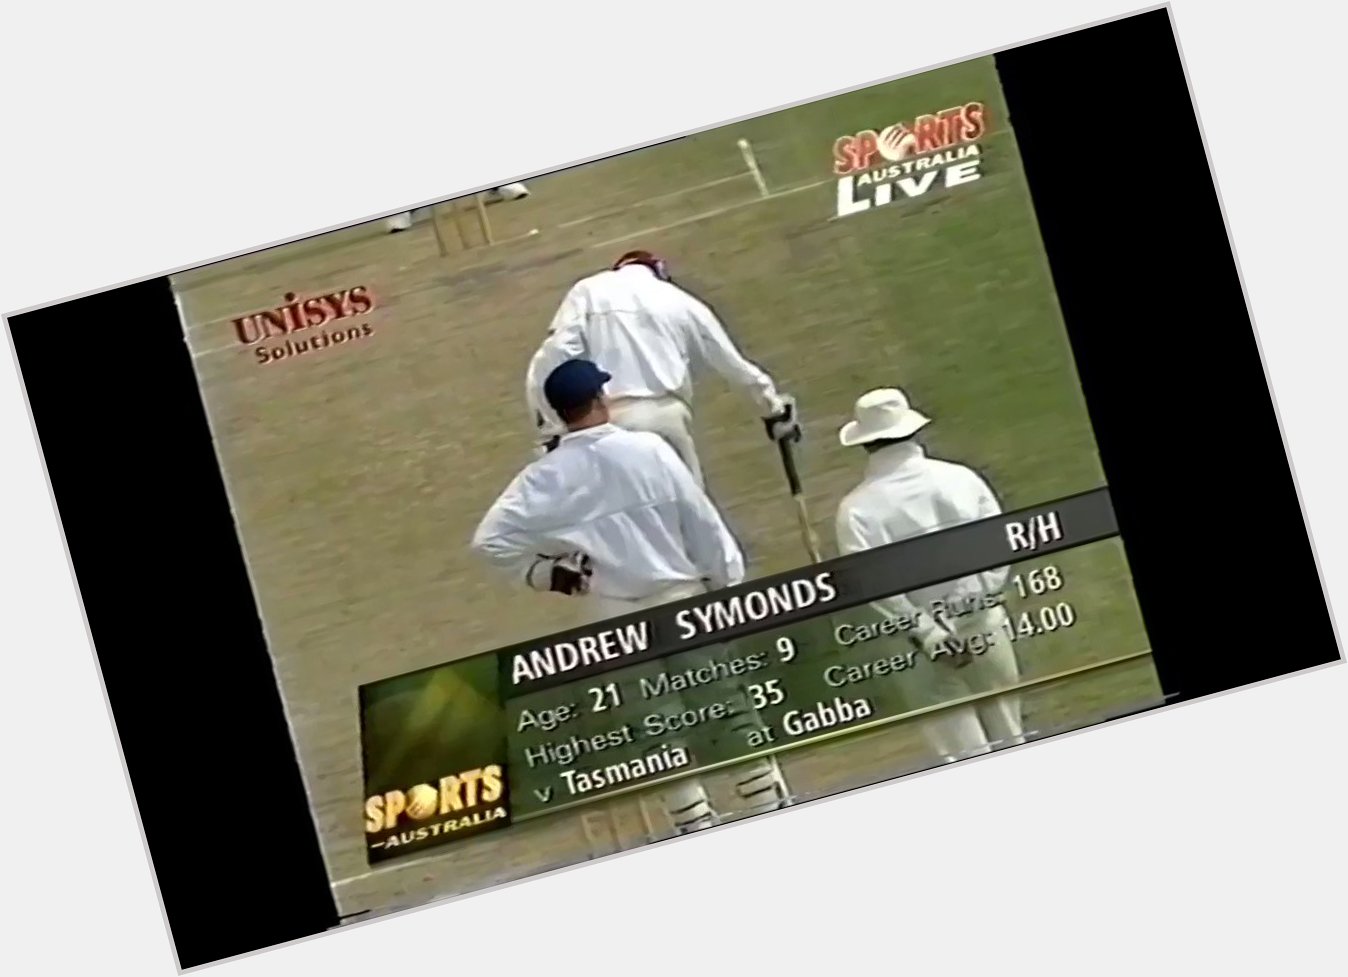 Happy birthday Andrew Symonds!

Here s the young man smashing his first ton for Queensland

 